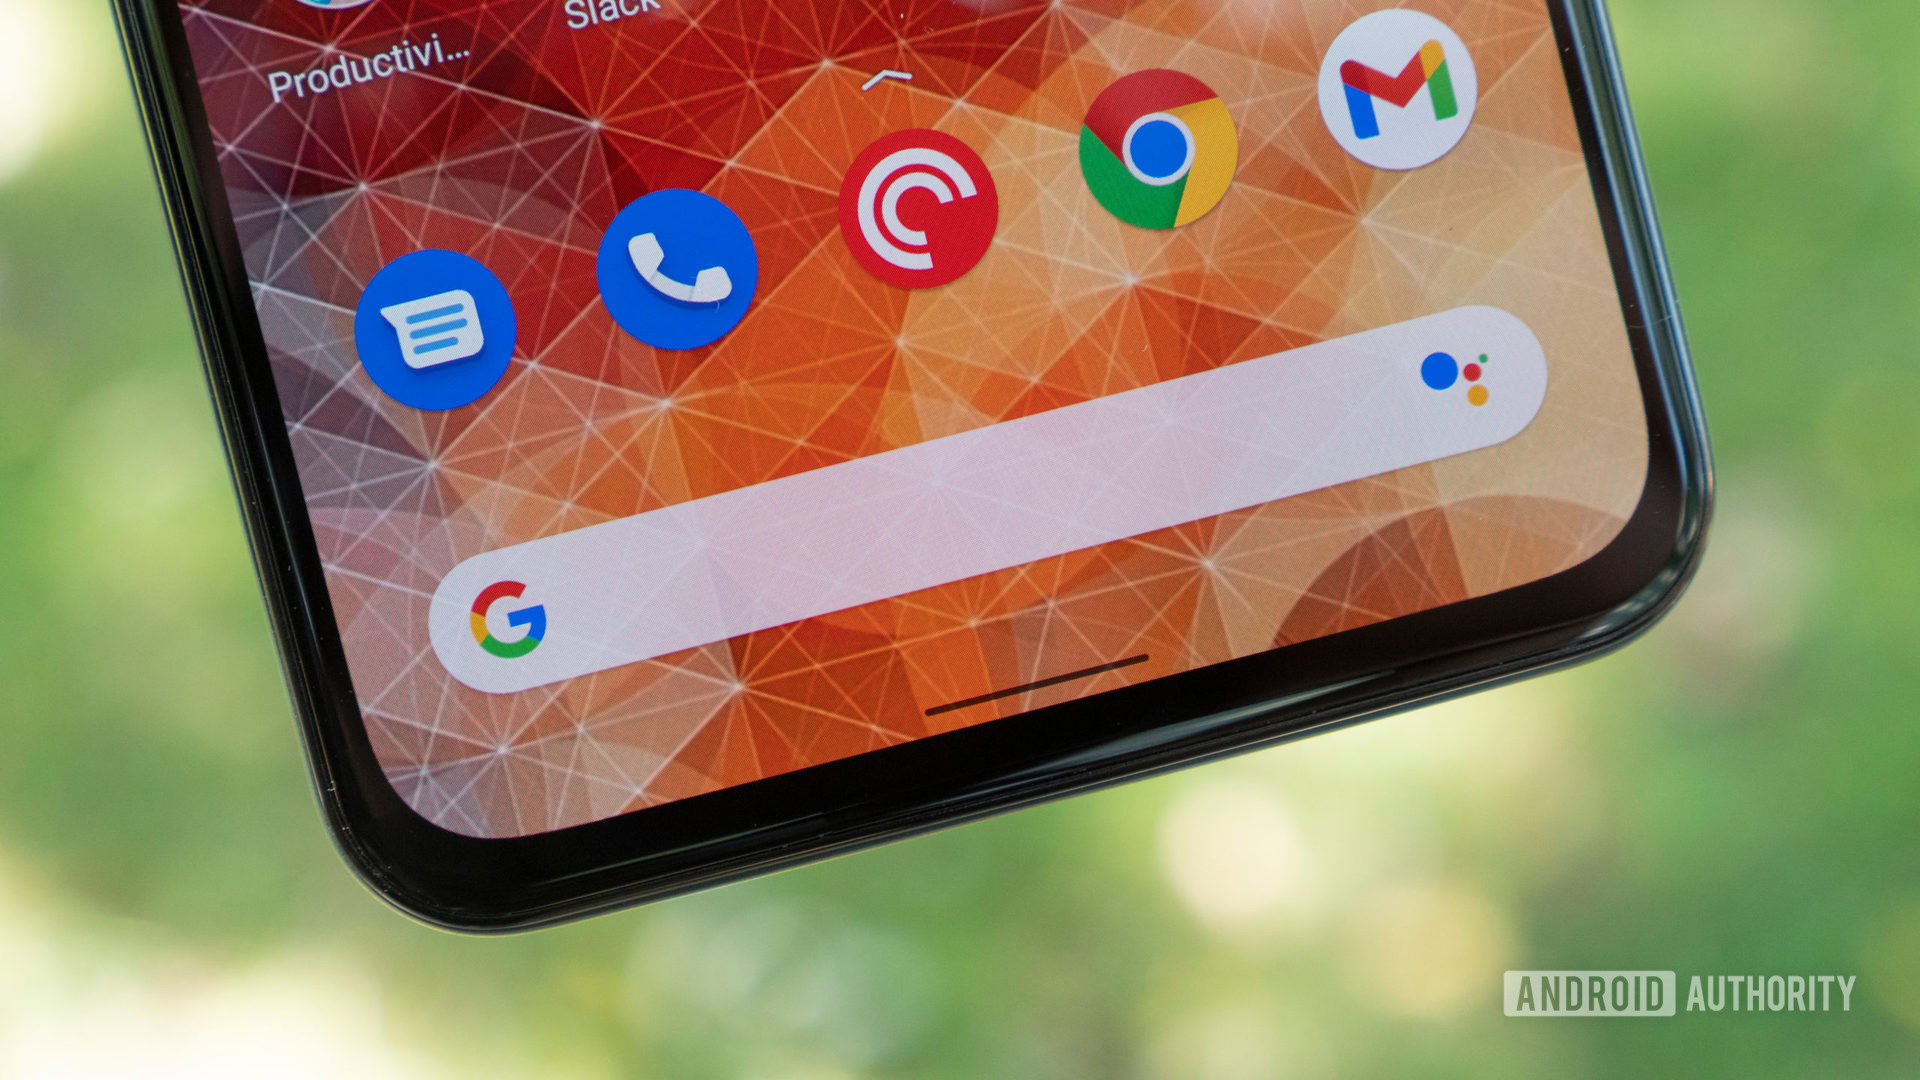 The Google Pixel 5a home screen showing a close-up of the Google search bar